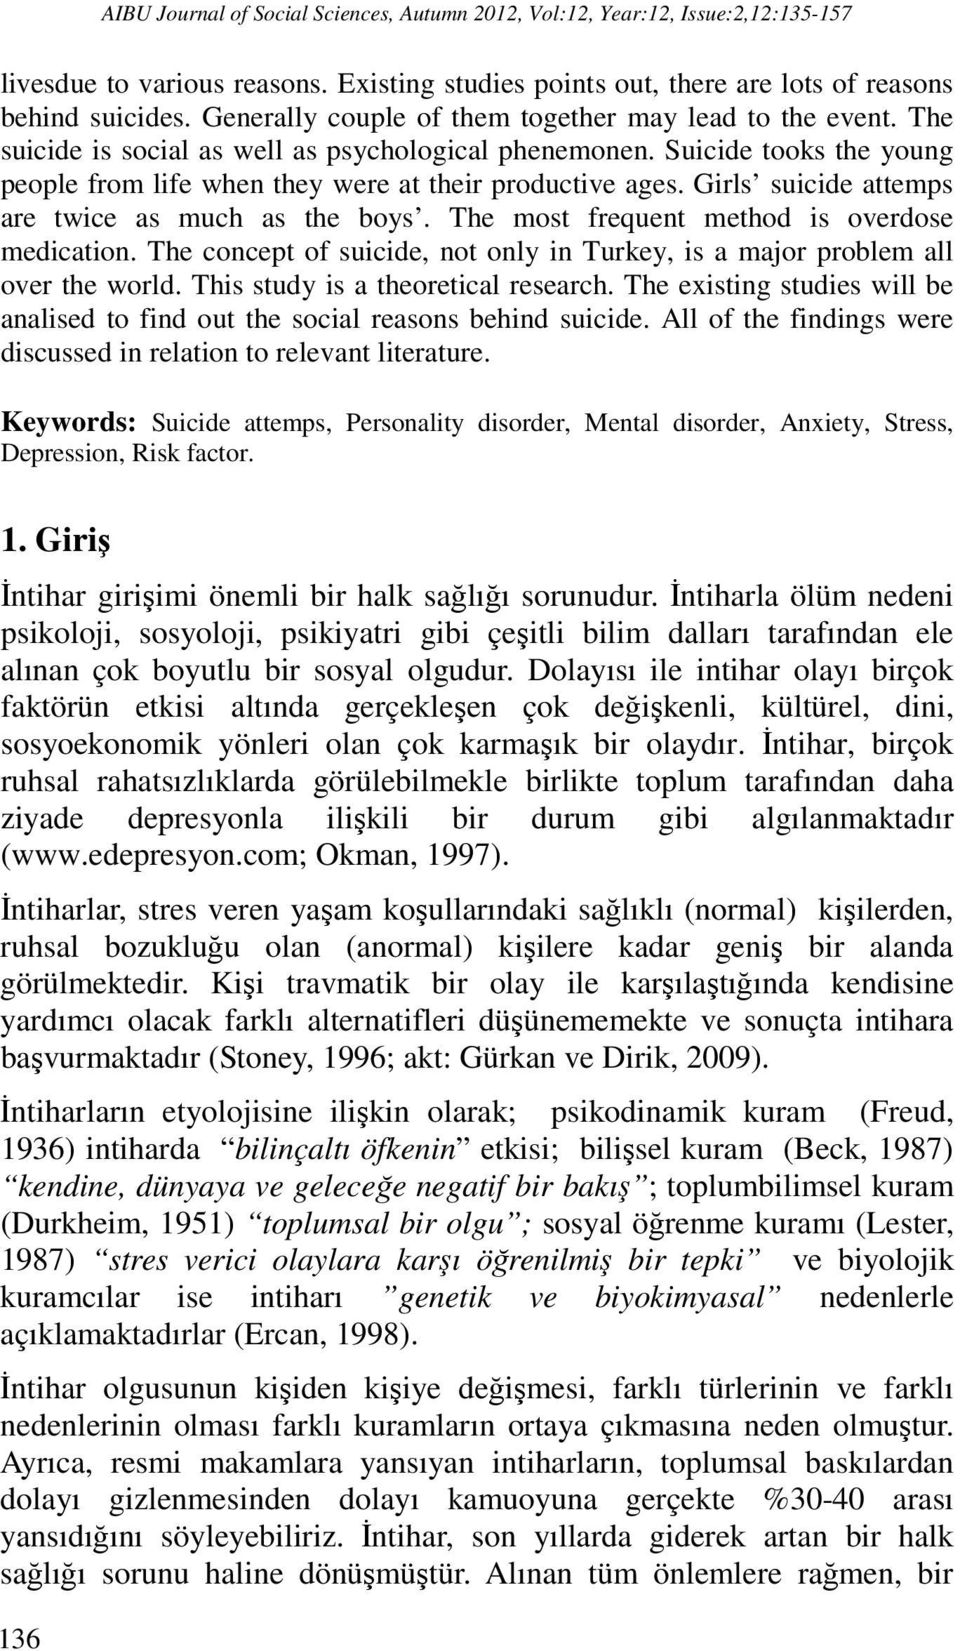 Girls suicide attemps are twice as much as the boys. The most frequent method is overdose medication. The concept of suicide, not only in Turkey, is a major problem all over the world.